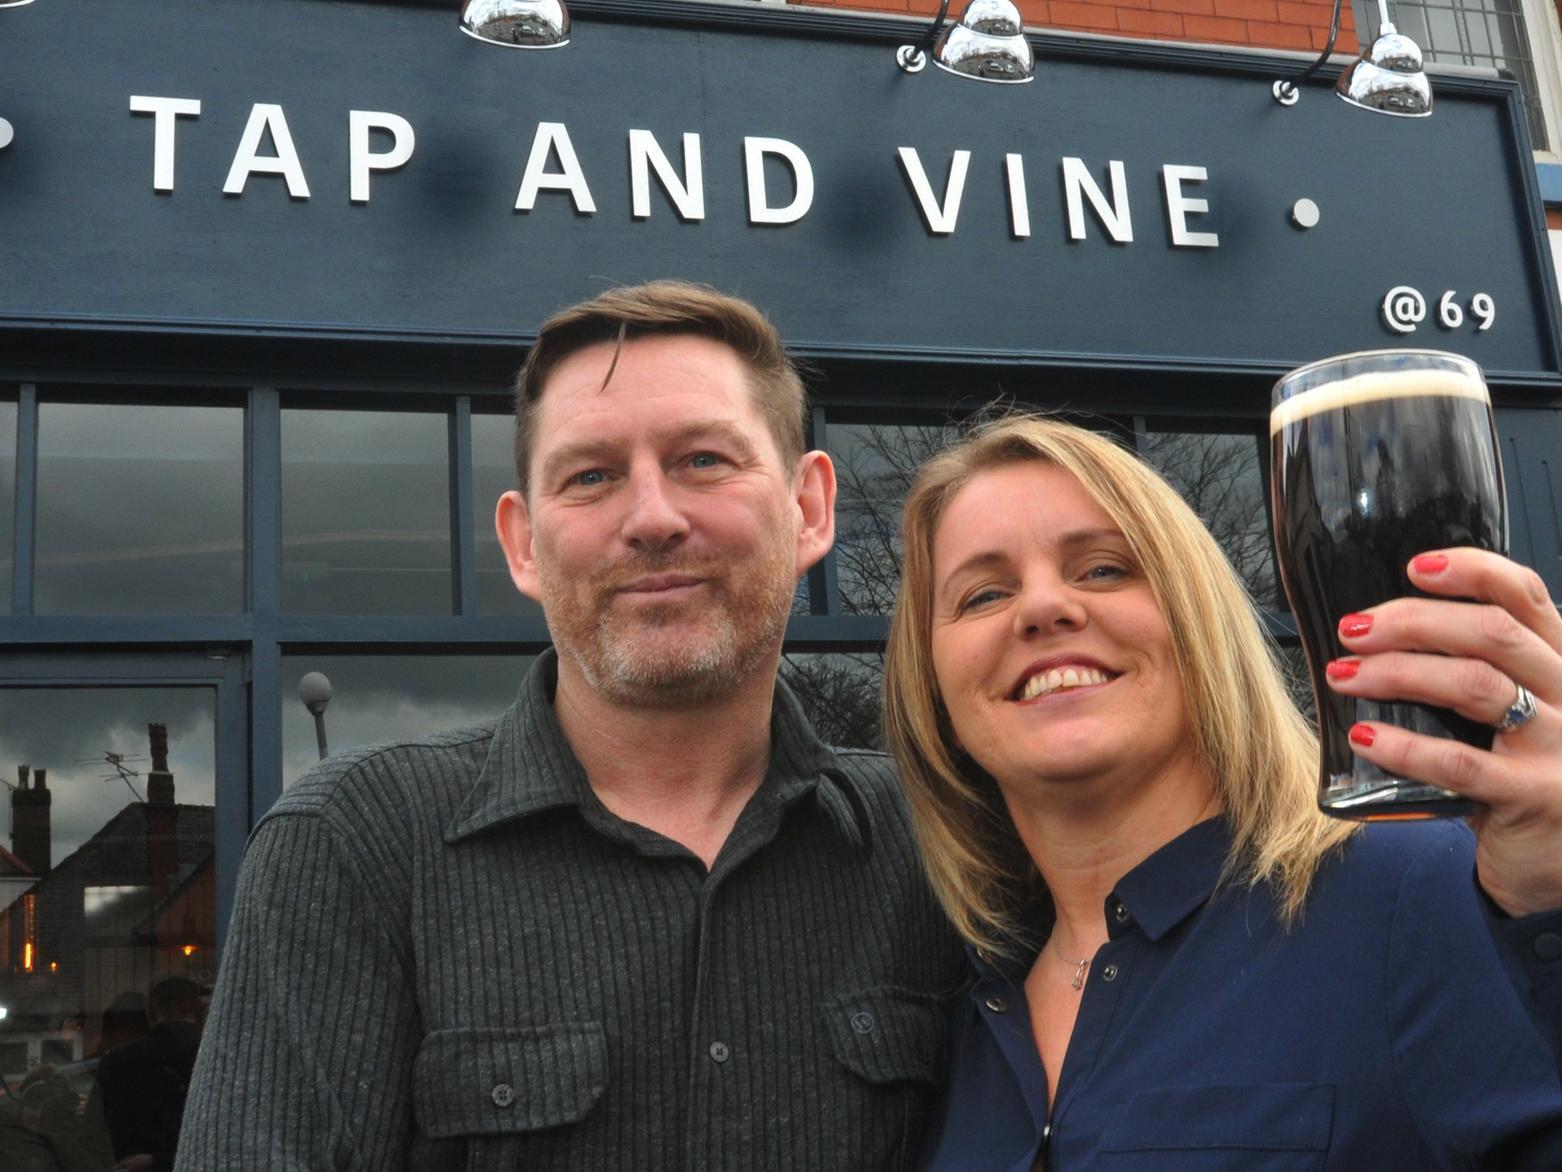 The micropub is owned by husband and wife team Jason and Debbie Colles. 
The venue was named CAMRA Central Lancashire Pub of the Season for Spring earlier this year.